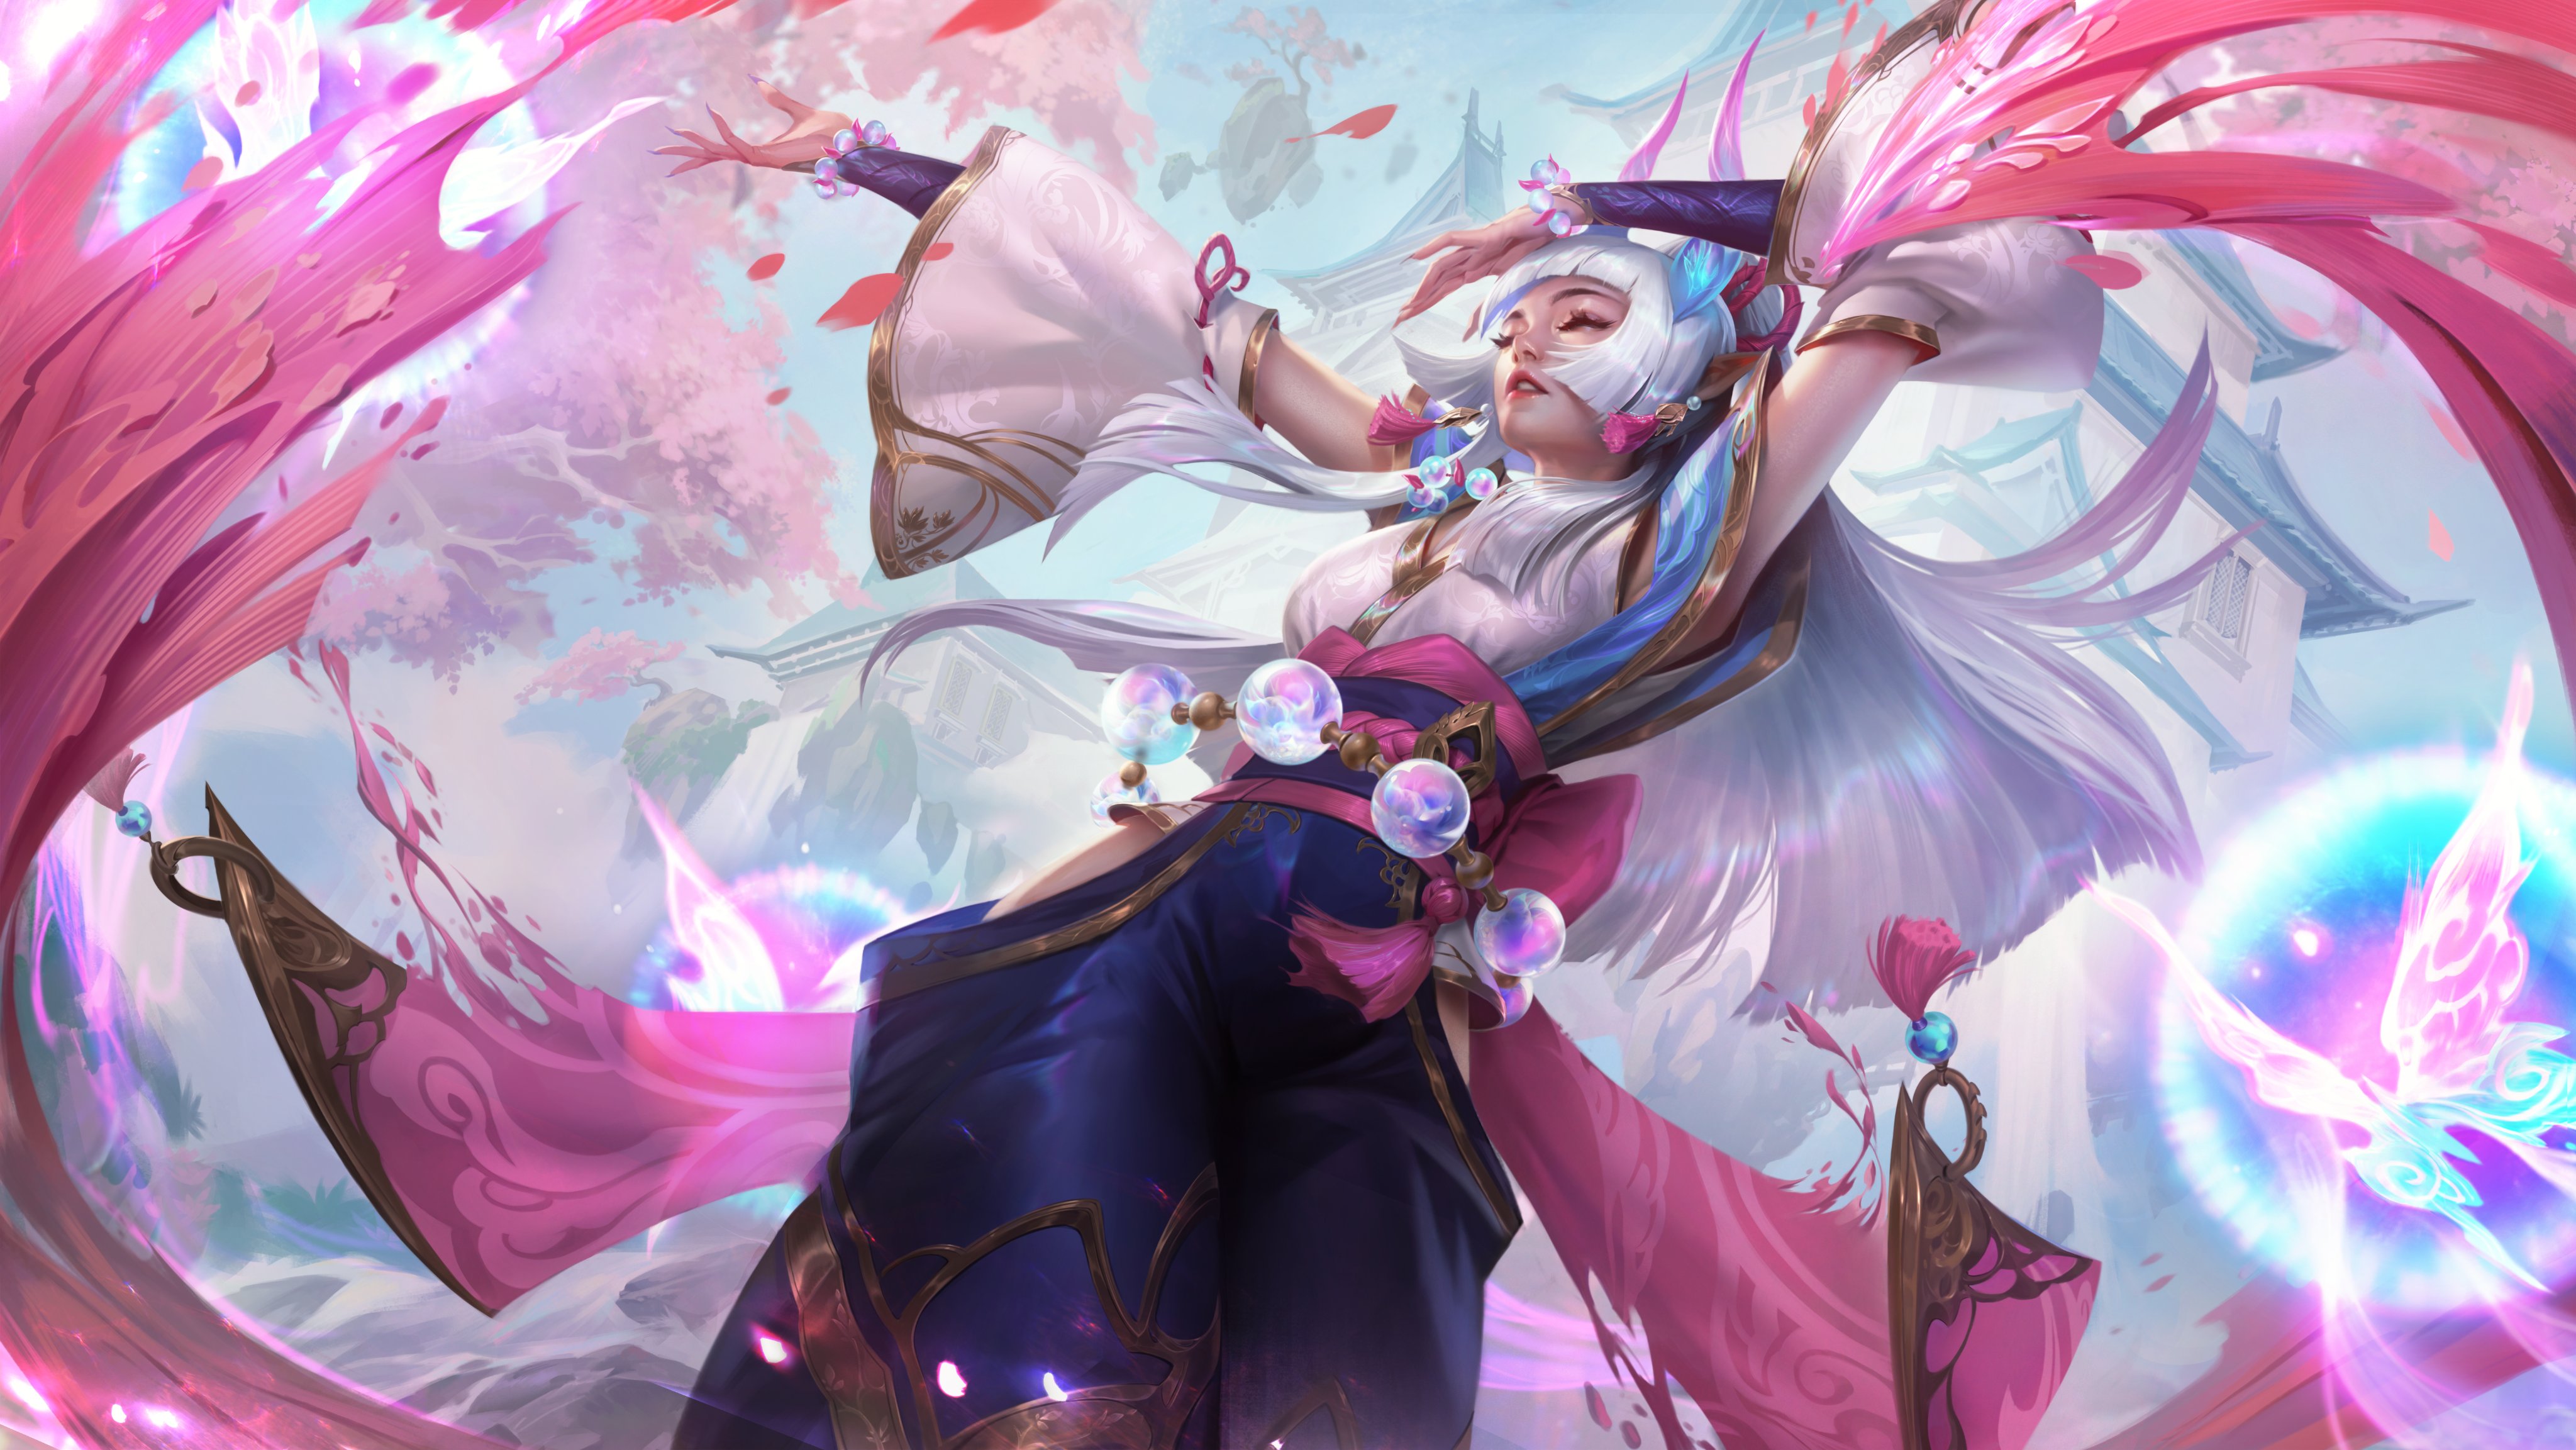 League of Legends - Spirit Blossom Syndra, a young woman with long white hair, flowers in her hair, and traditional garb. She is surrounded by three orbs, each one with a butterfly hovering within.